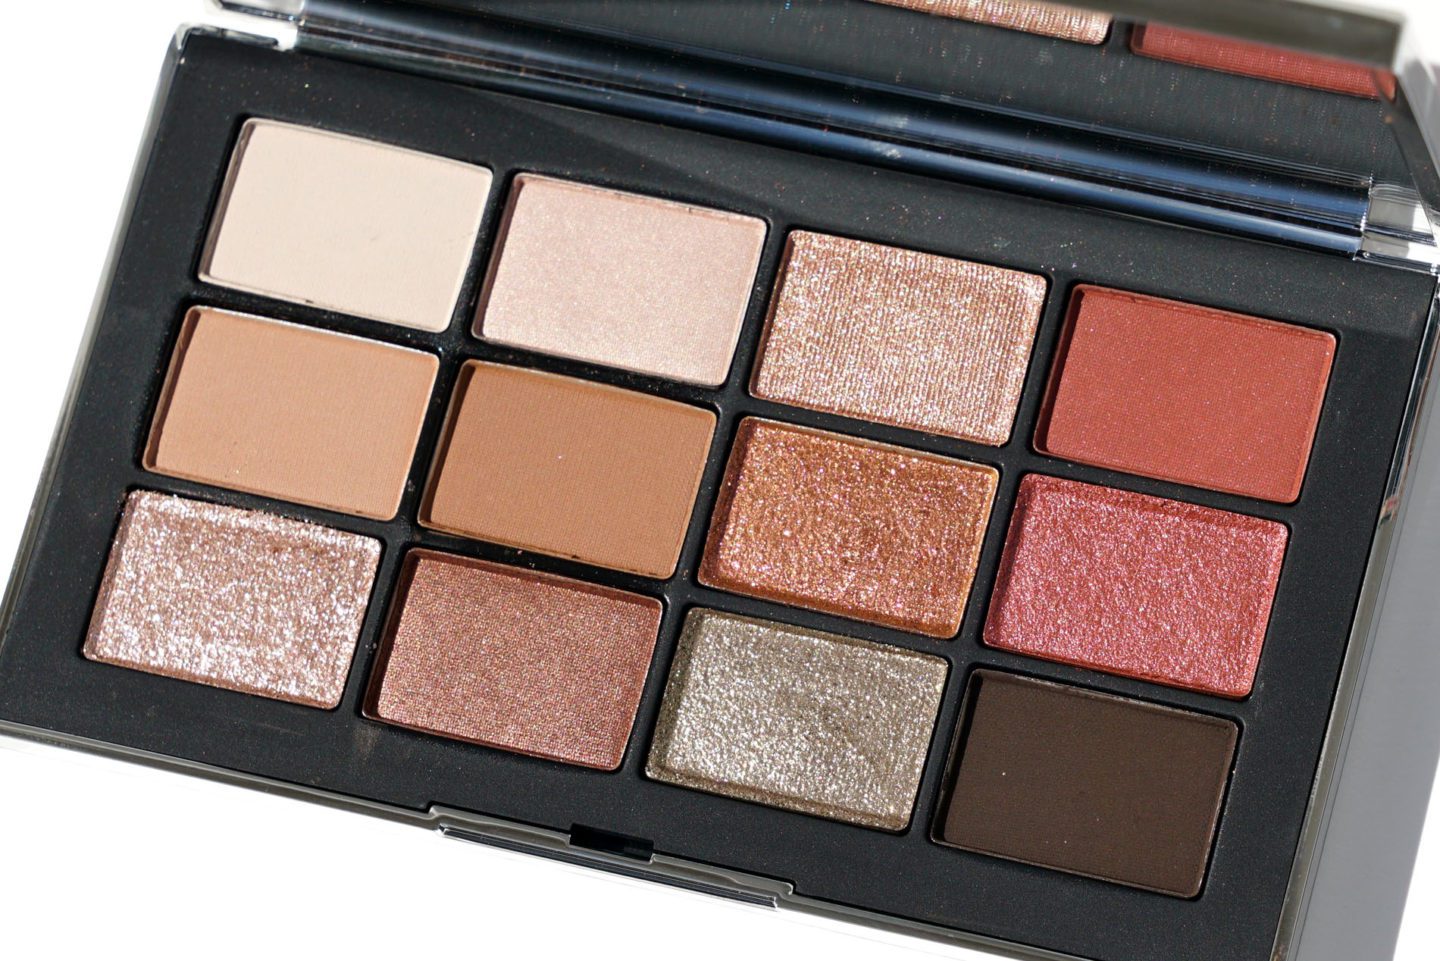 NARS NARSissist Wanted Eyeshadow Palette Review | The Beauty Look Book